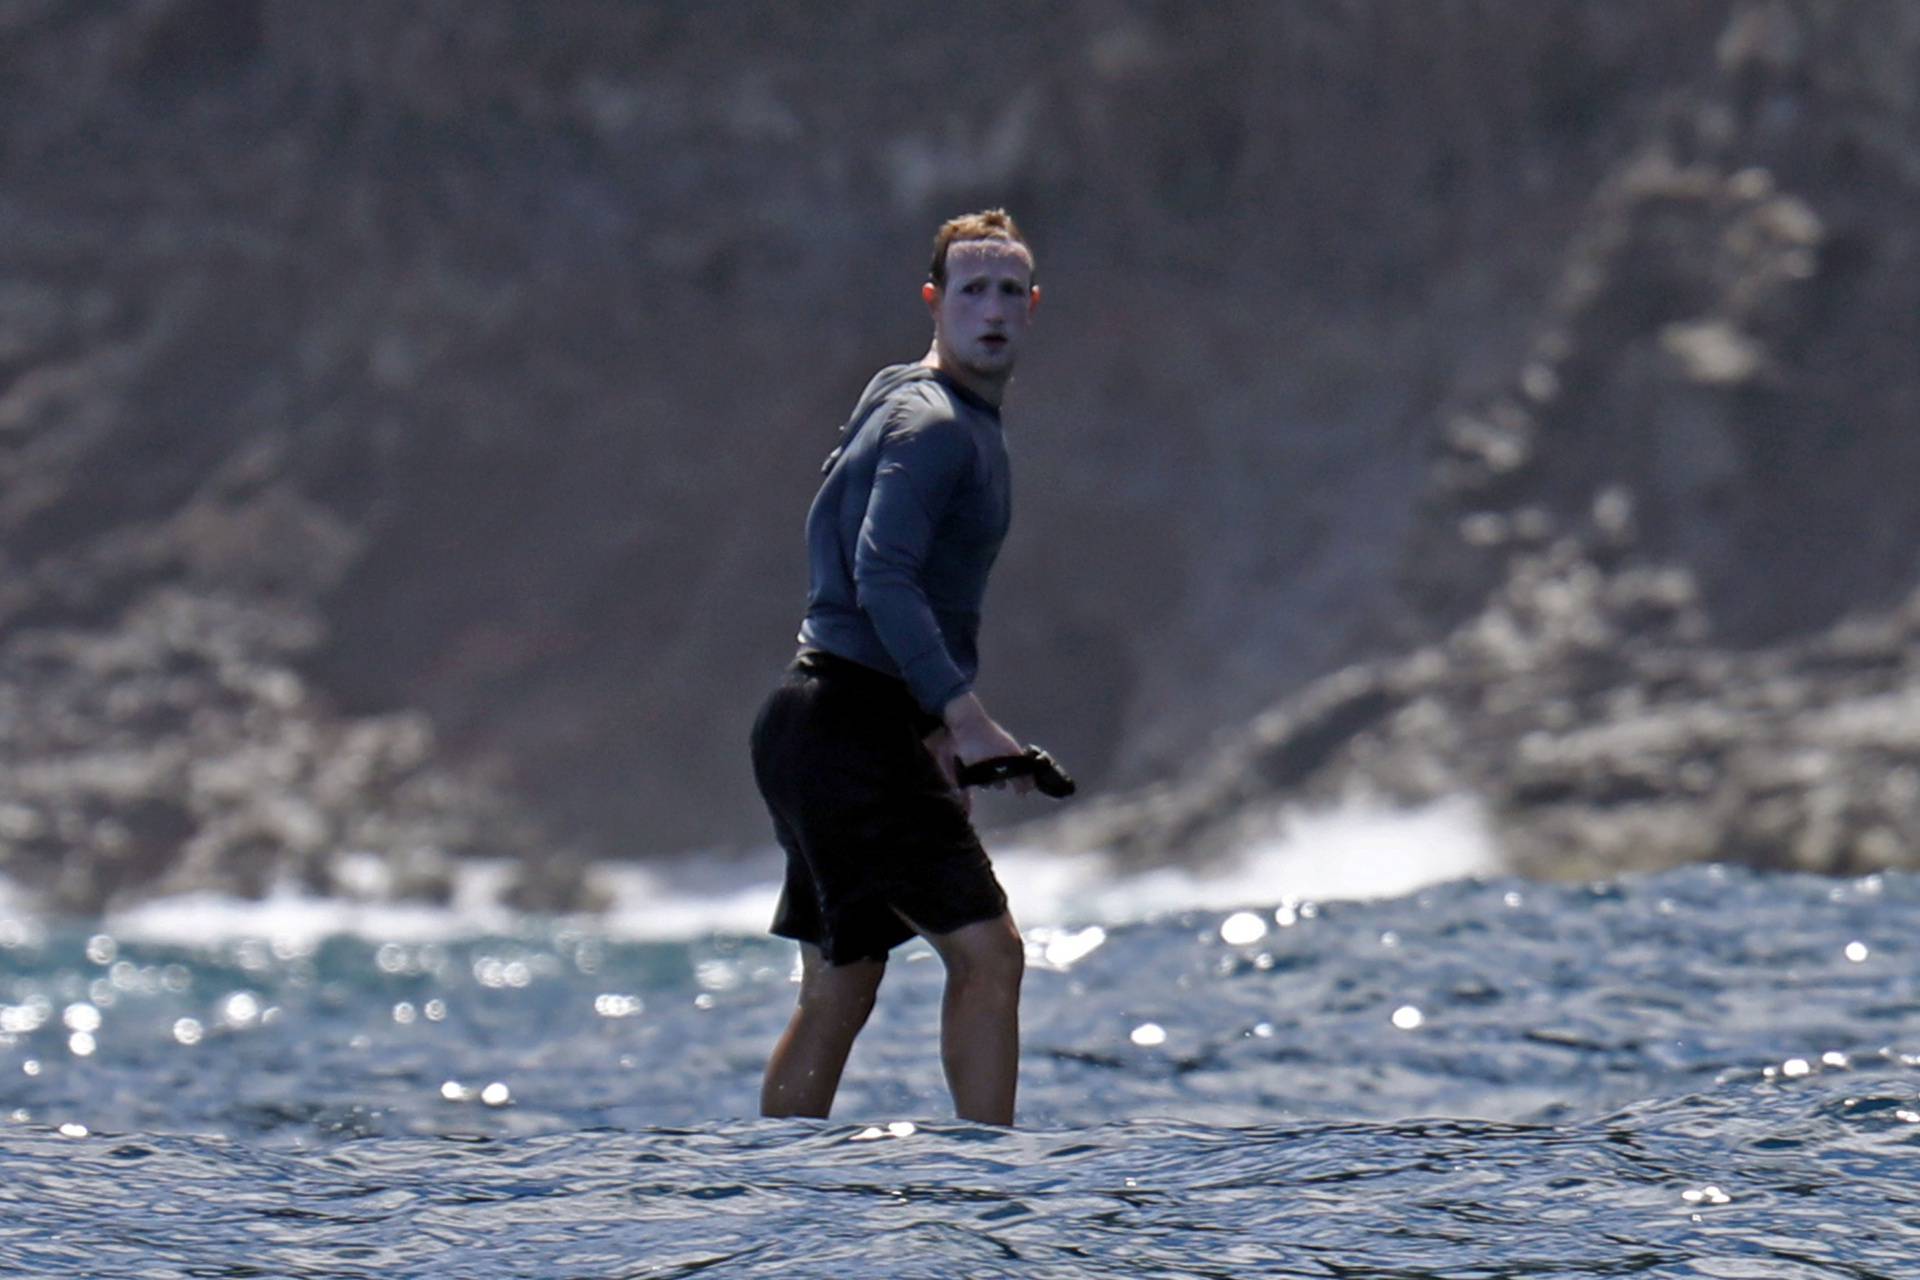 *PREMIUM EXCLUSIVE* NO WEB UNTIL 3PM EDT 20TH JULY * Mark Zuckerberg takes to the high seas in Hawaii riding an eFoil